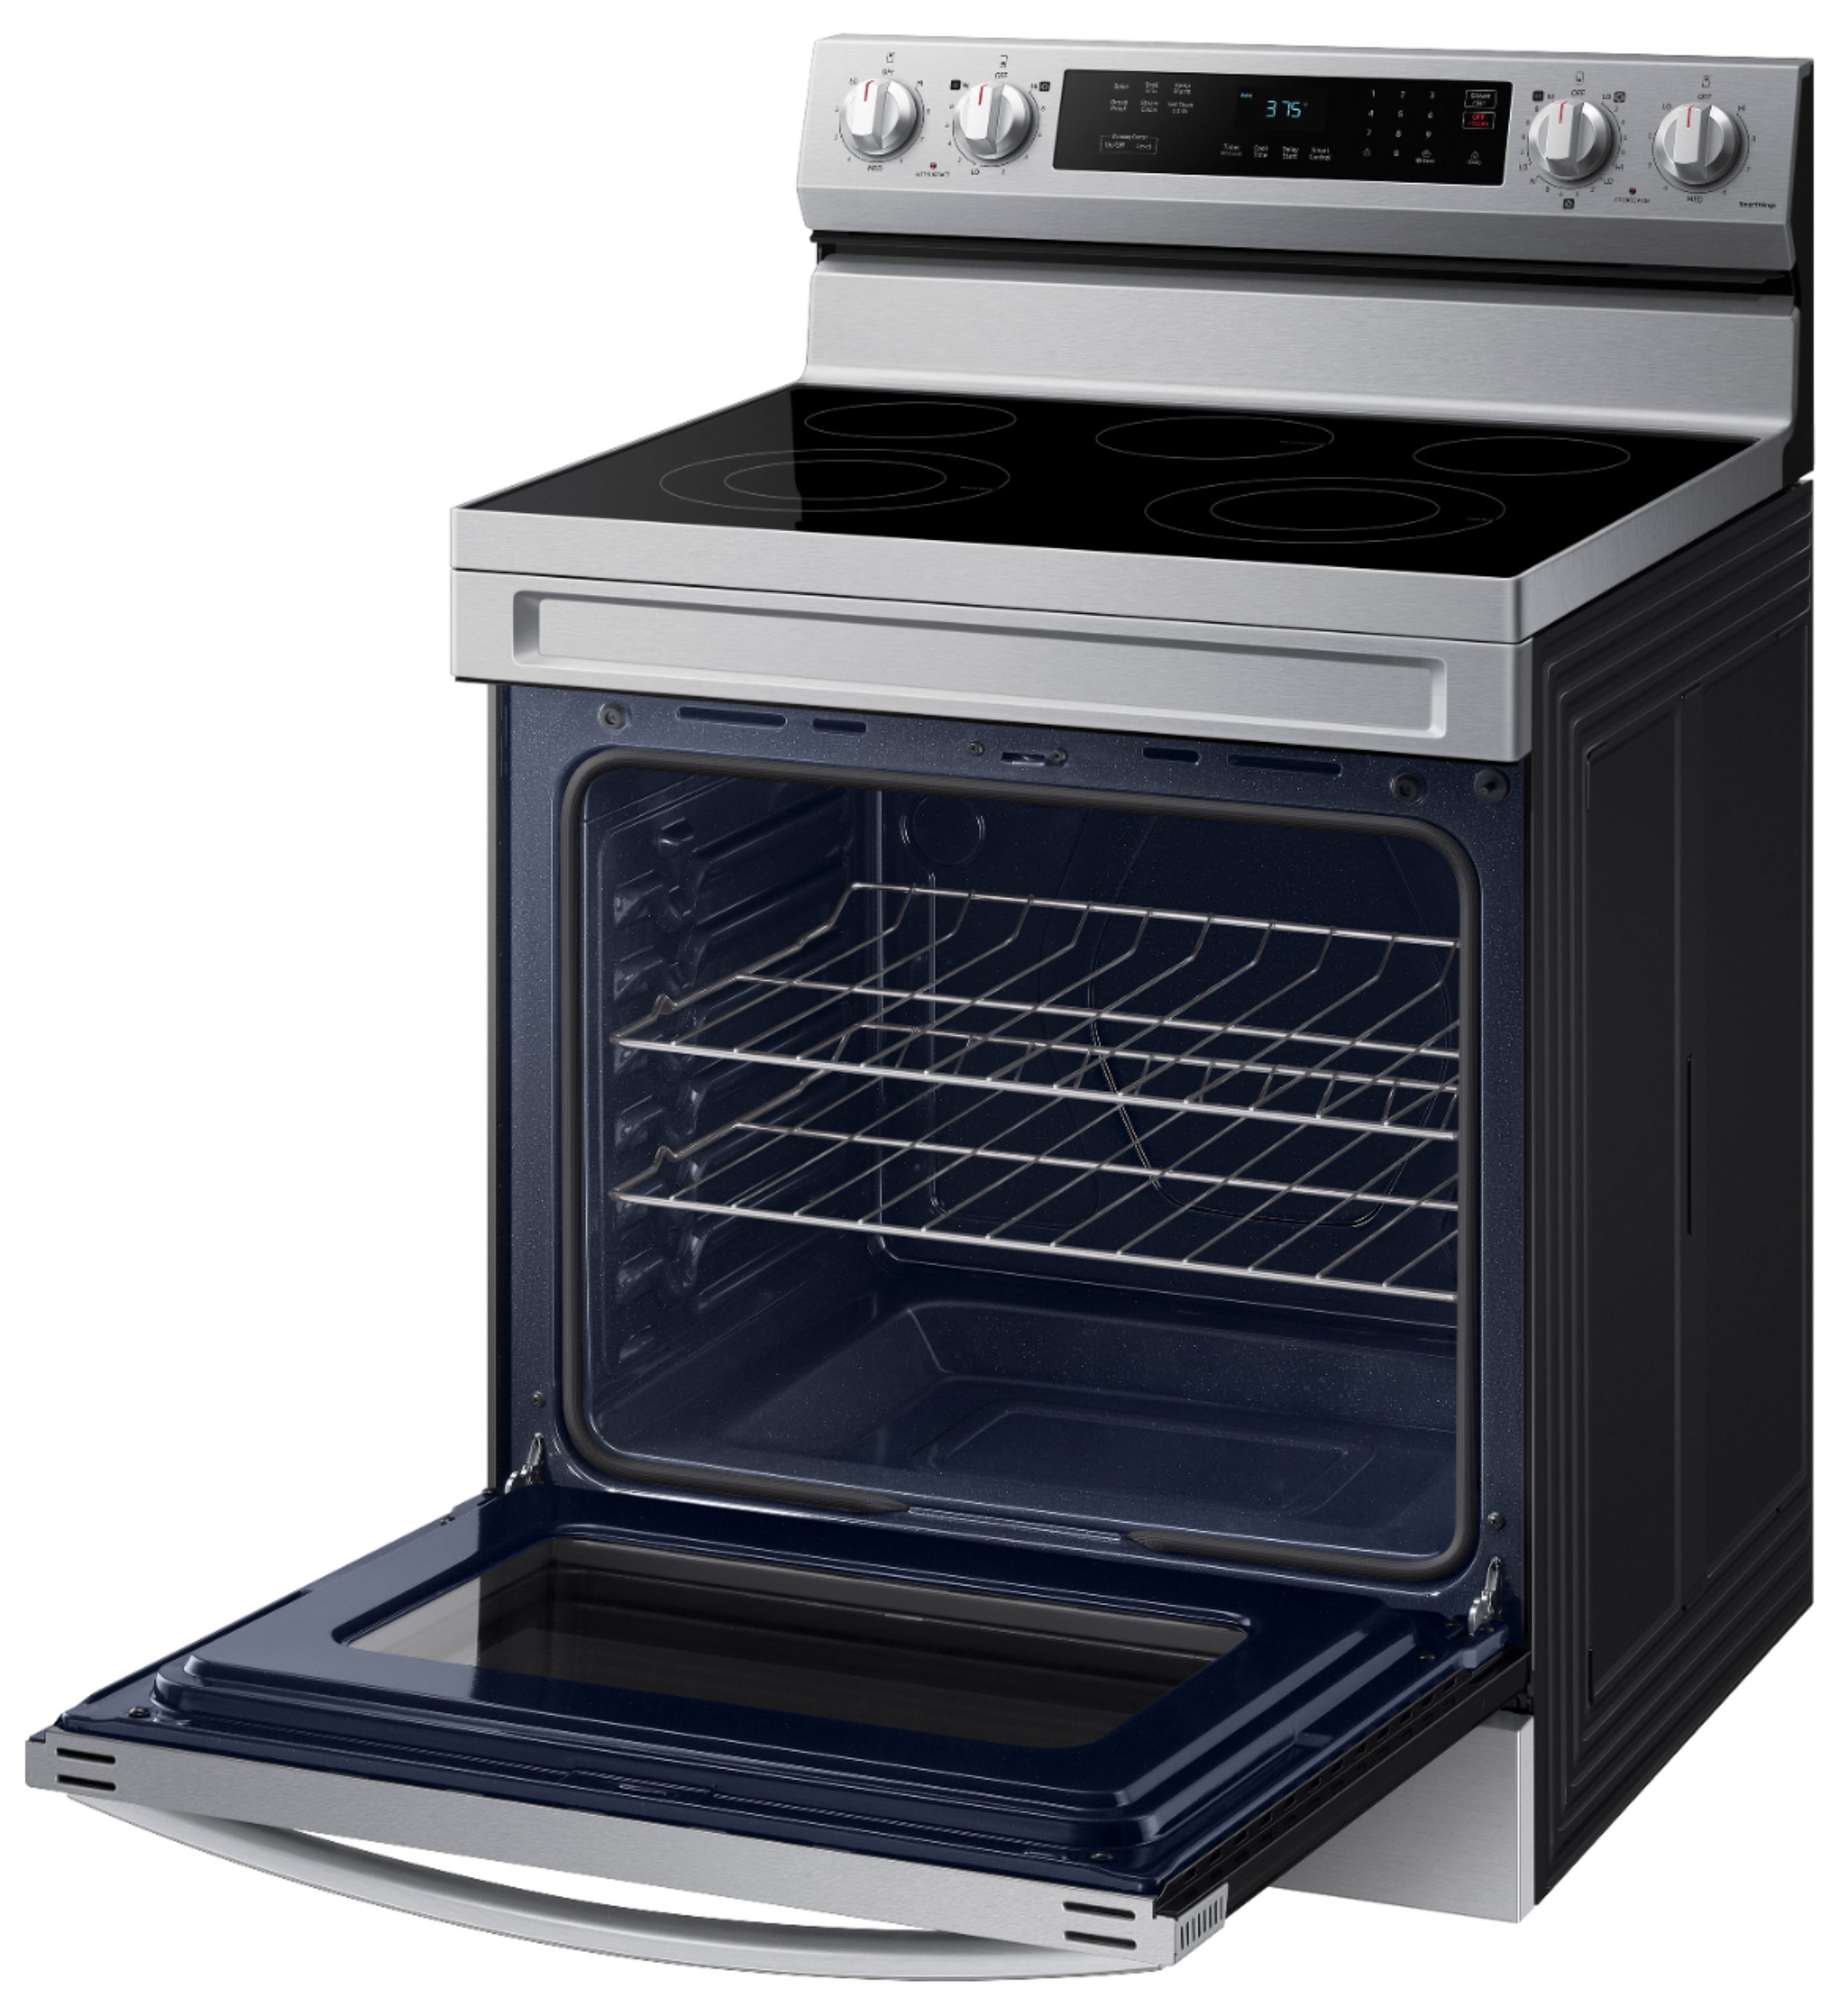 Samsung 6.3 cu. ft. Freestanding Electric Range with Rapid Boil™, WiFi &  Self Clean Stainless Steel NE63A6311SS/AA - Best Buy